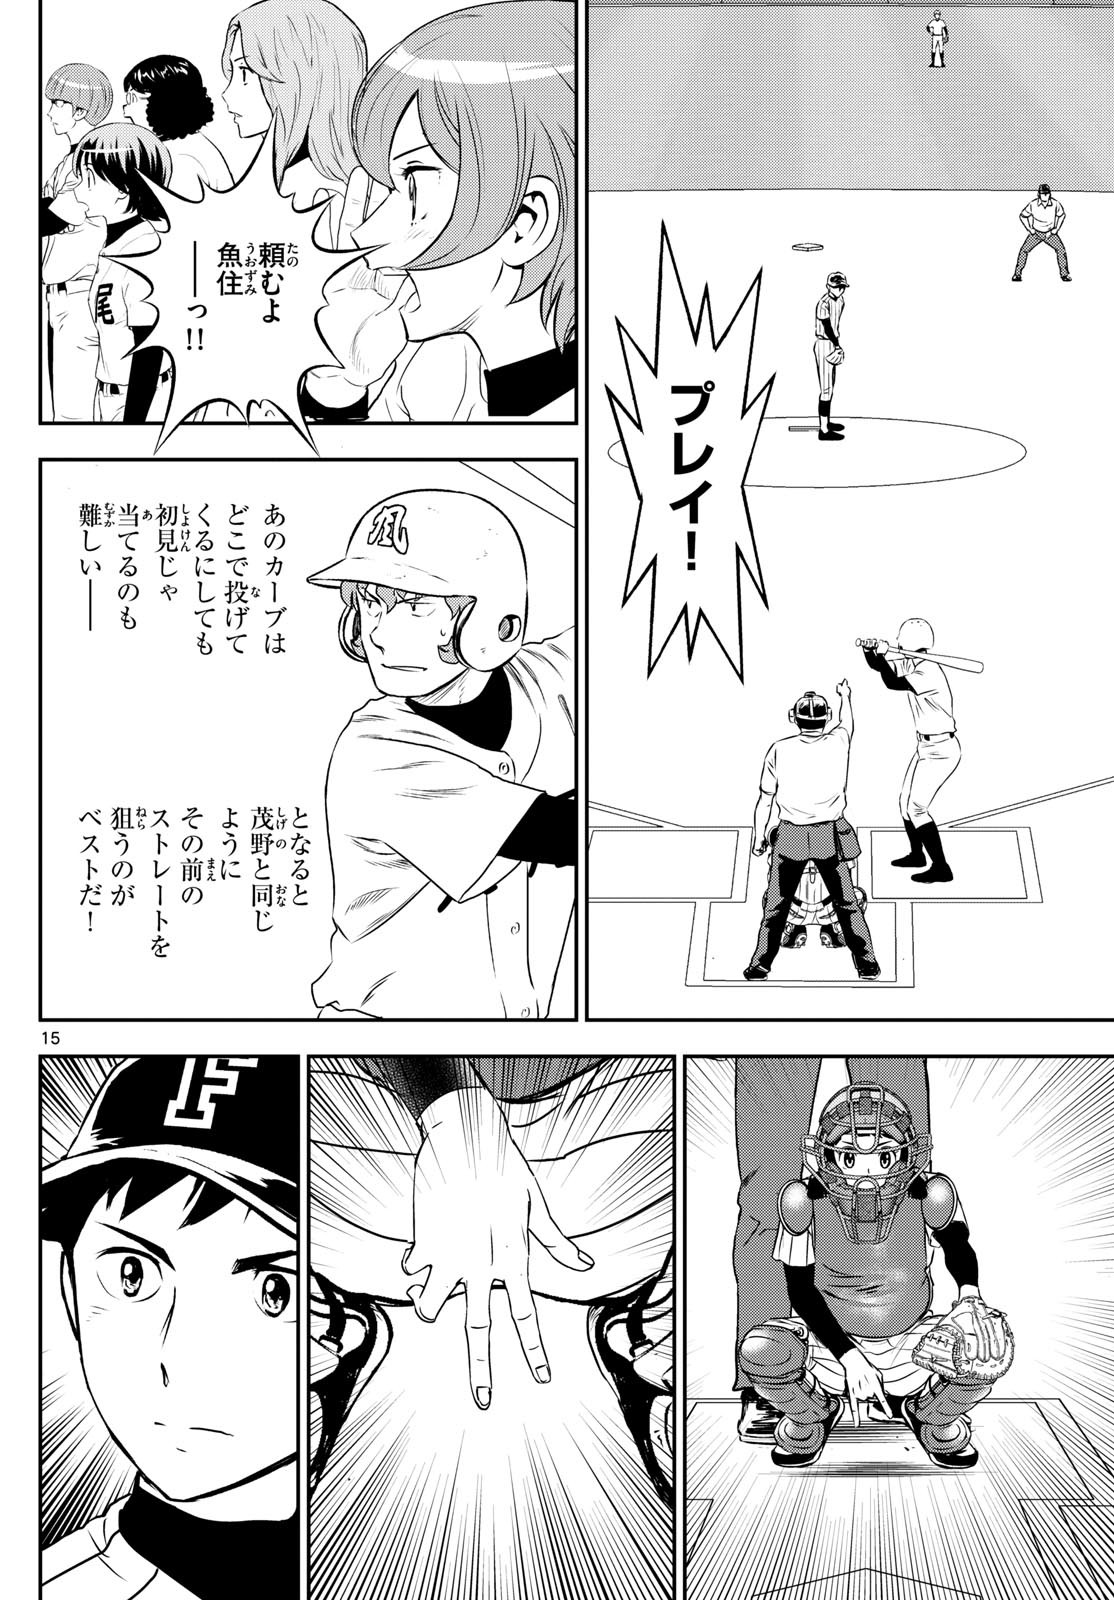 Major 2nd - メジャーセカンド - Chapter 269 - Page 14